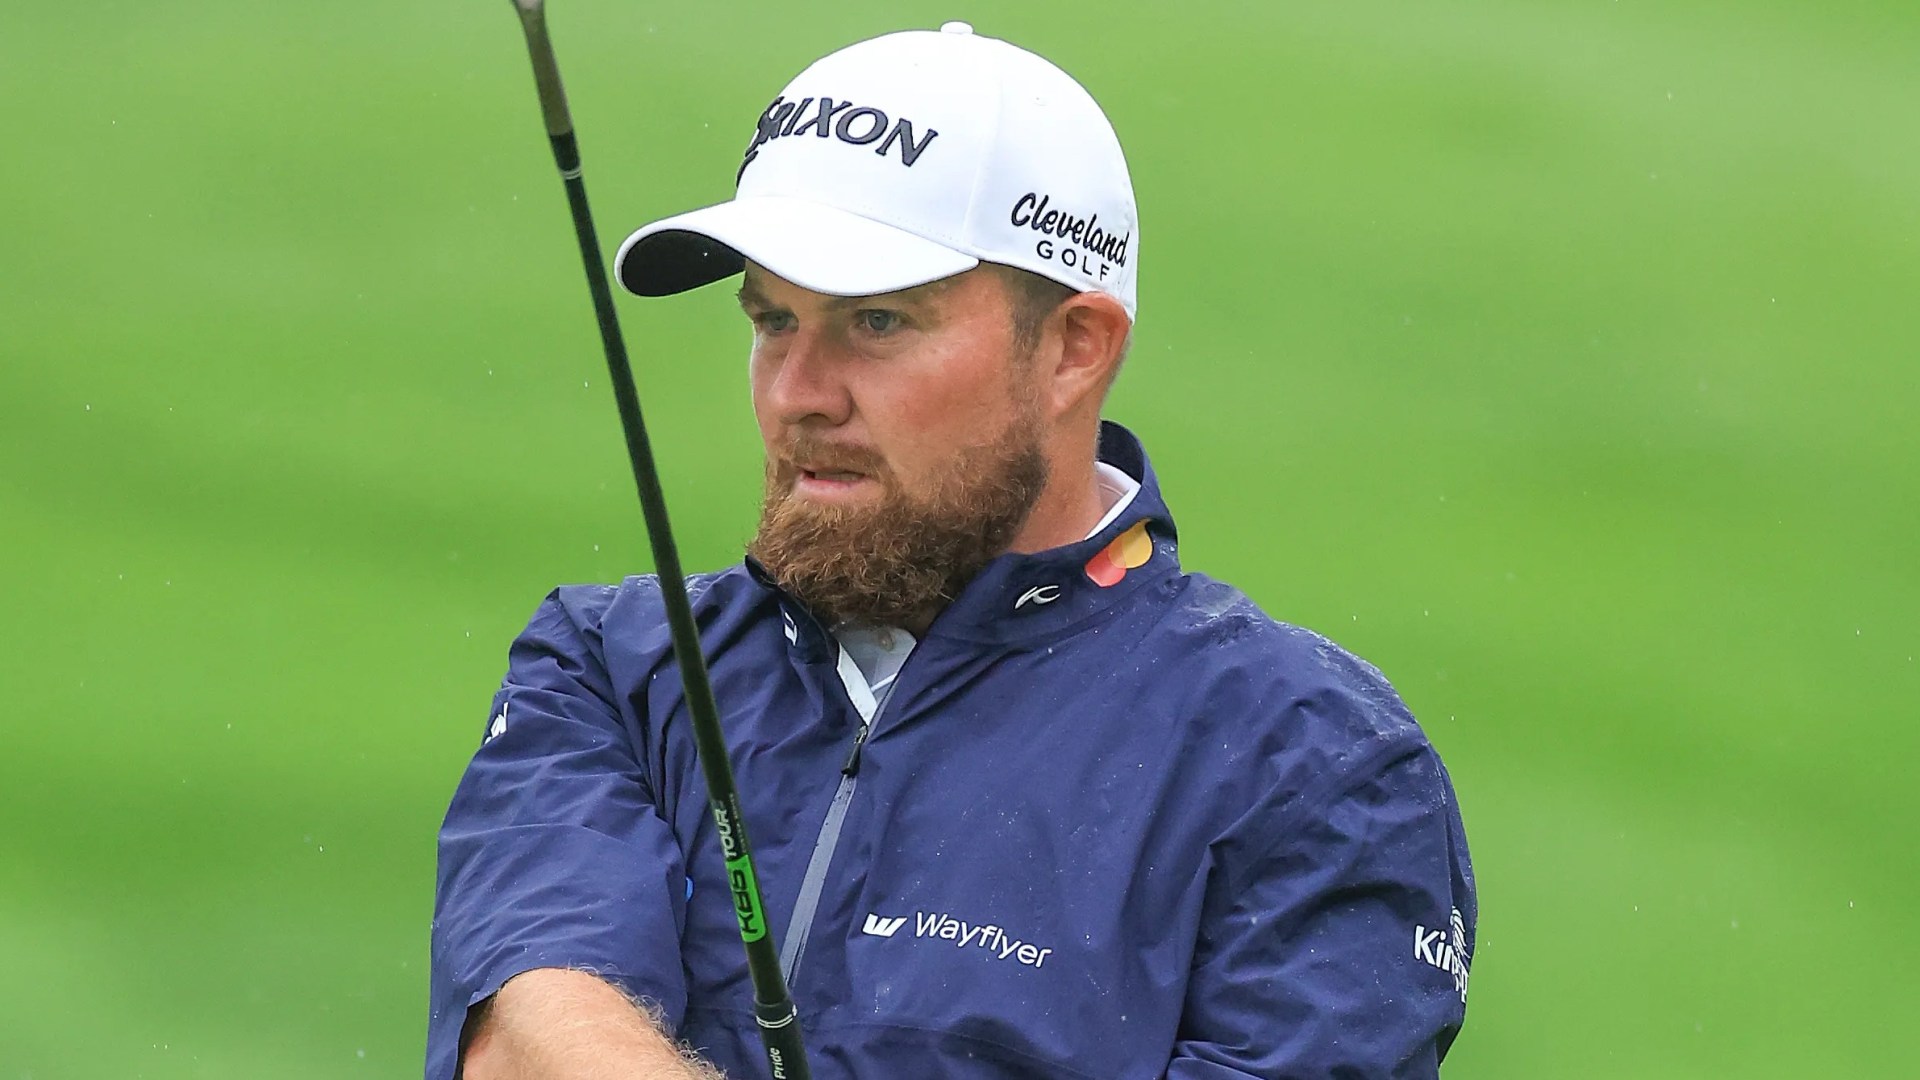 Shane Lowry cards solid second round at USPGA as Collin Morikawa surges during dramatic and tragic day at Valhalla [Video]